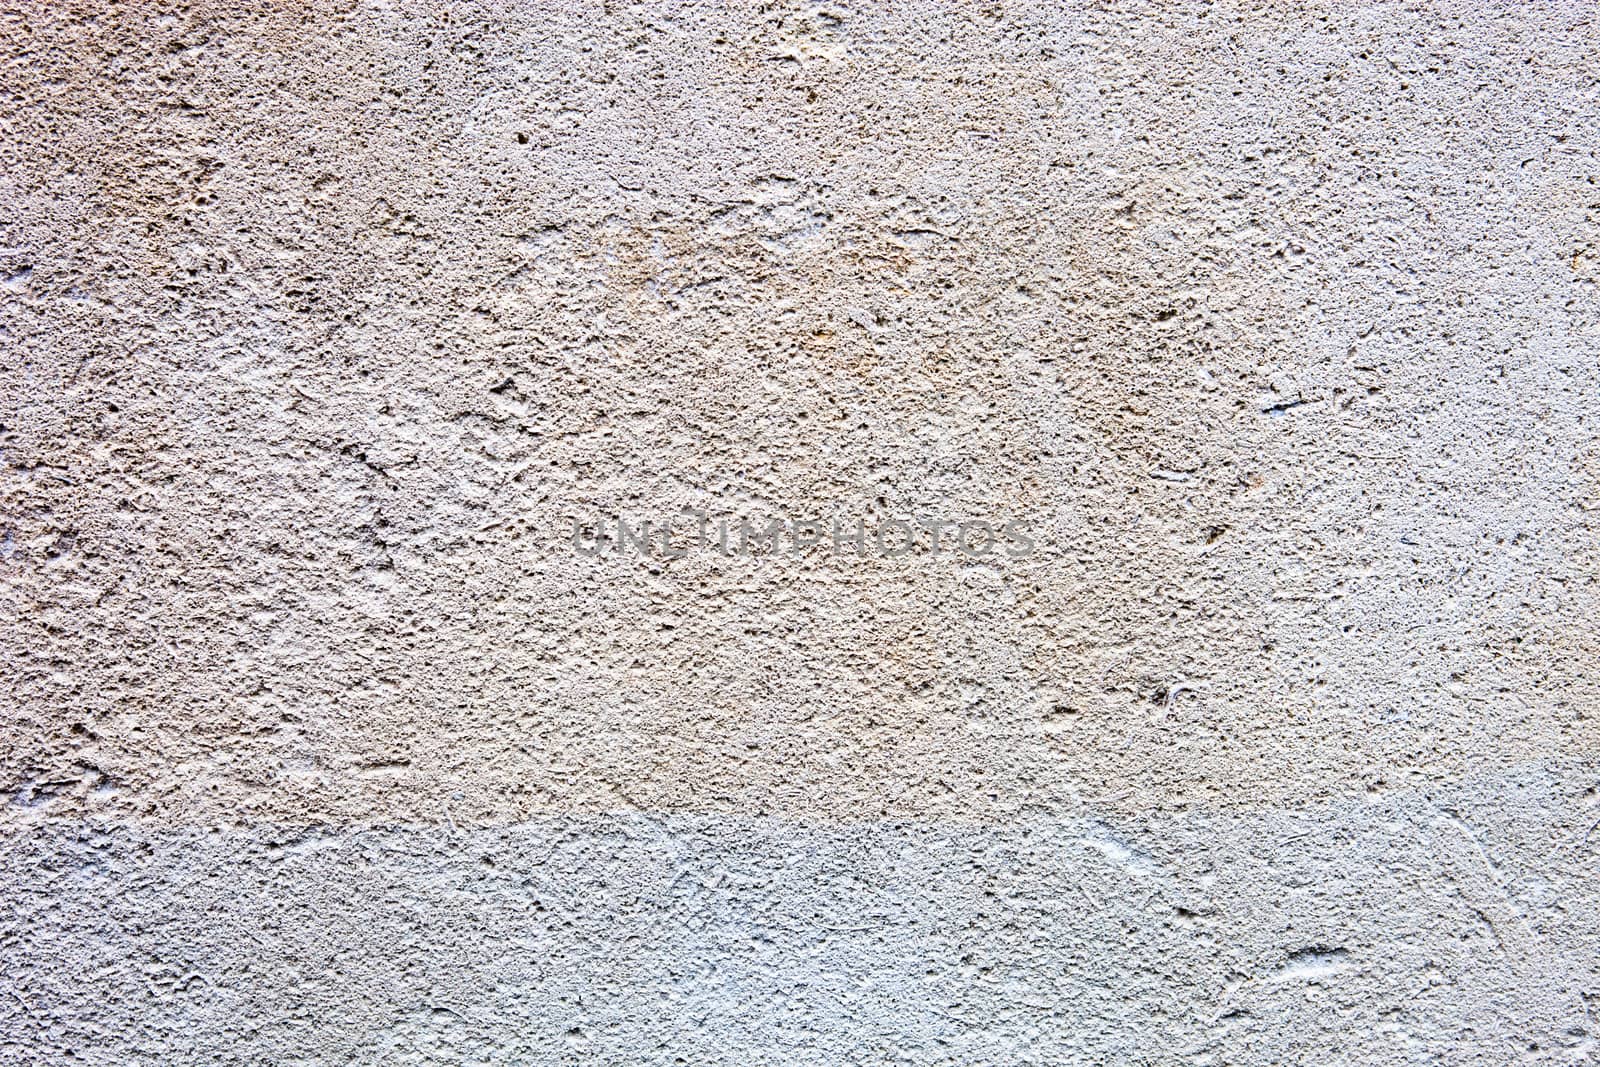 Concrete surface with rich and various texture by rootstocks